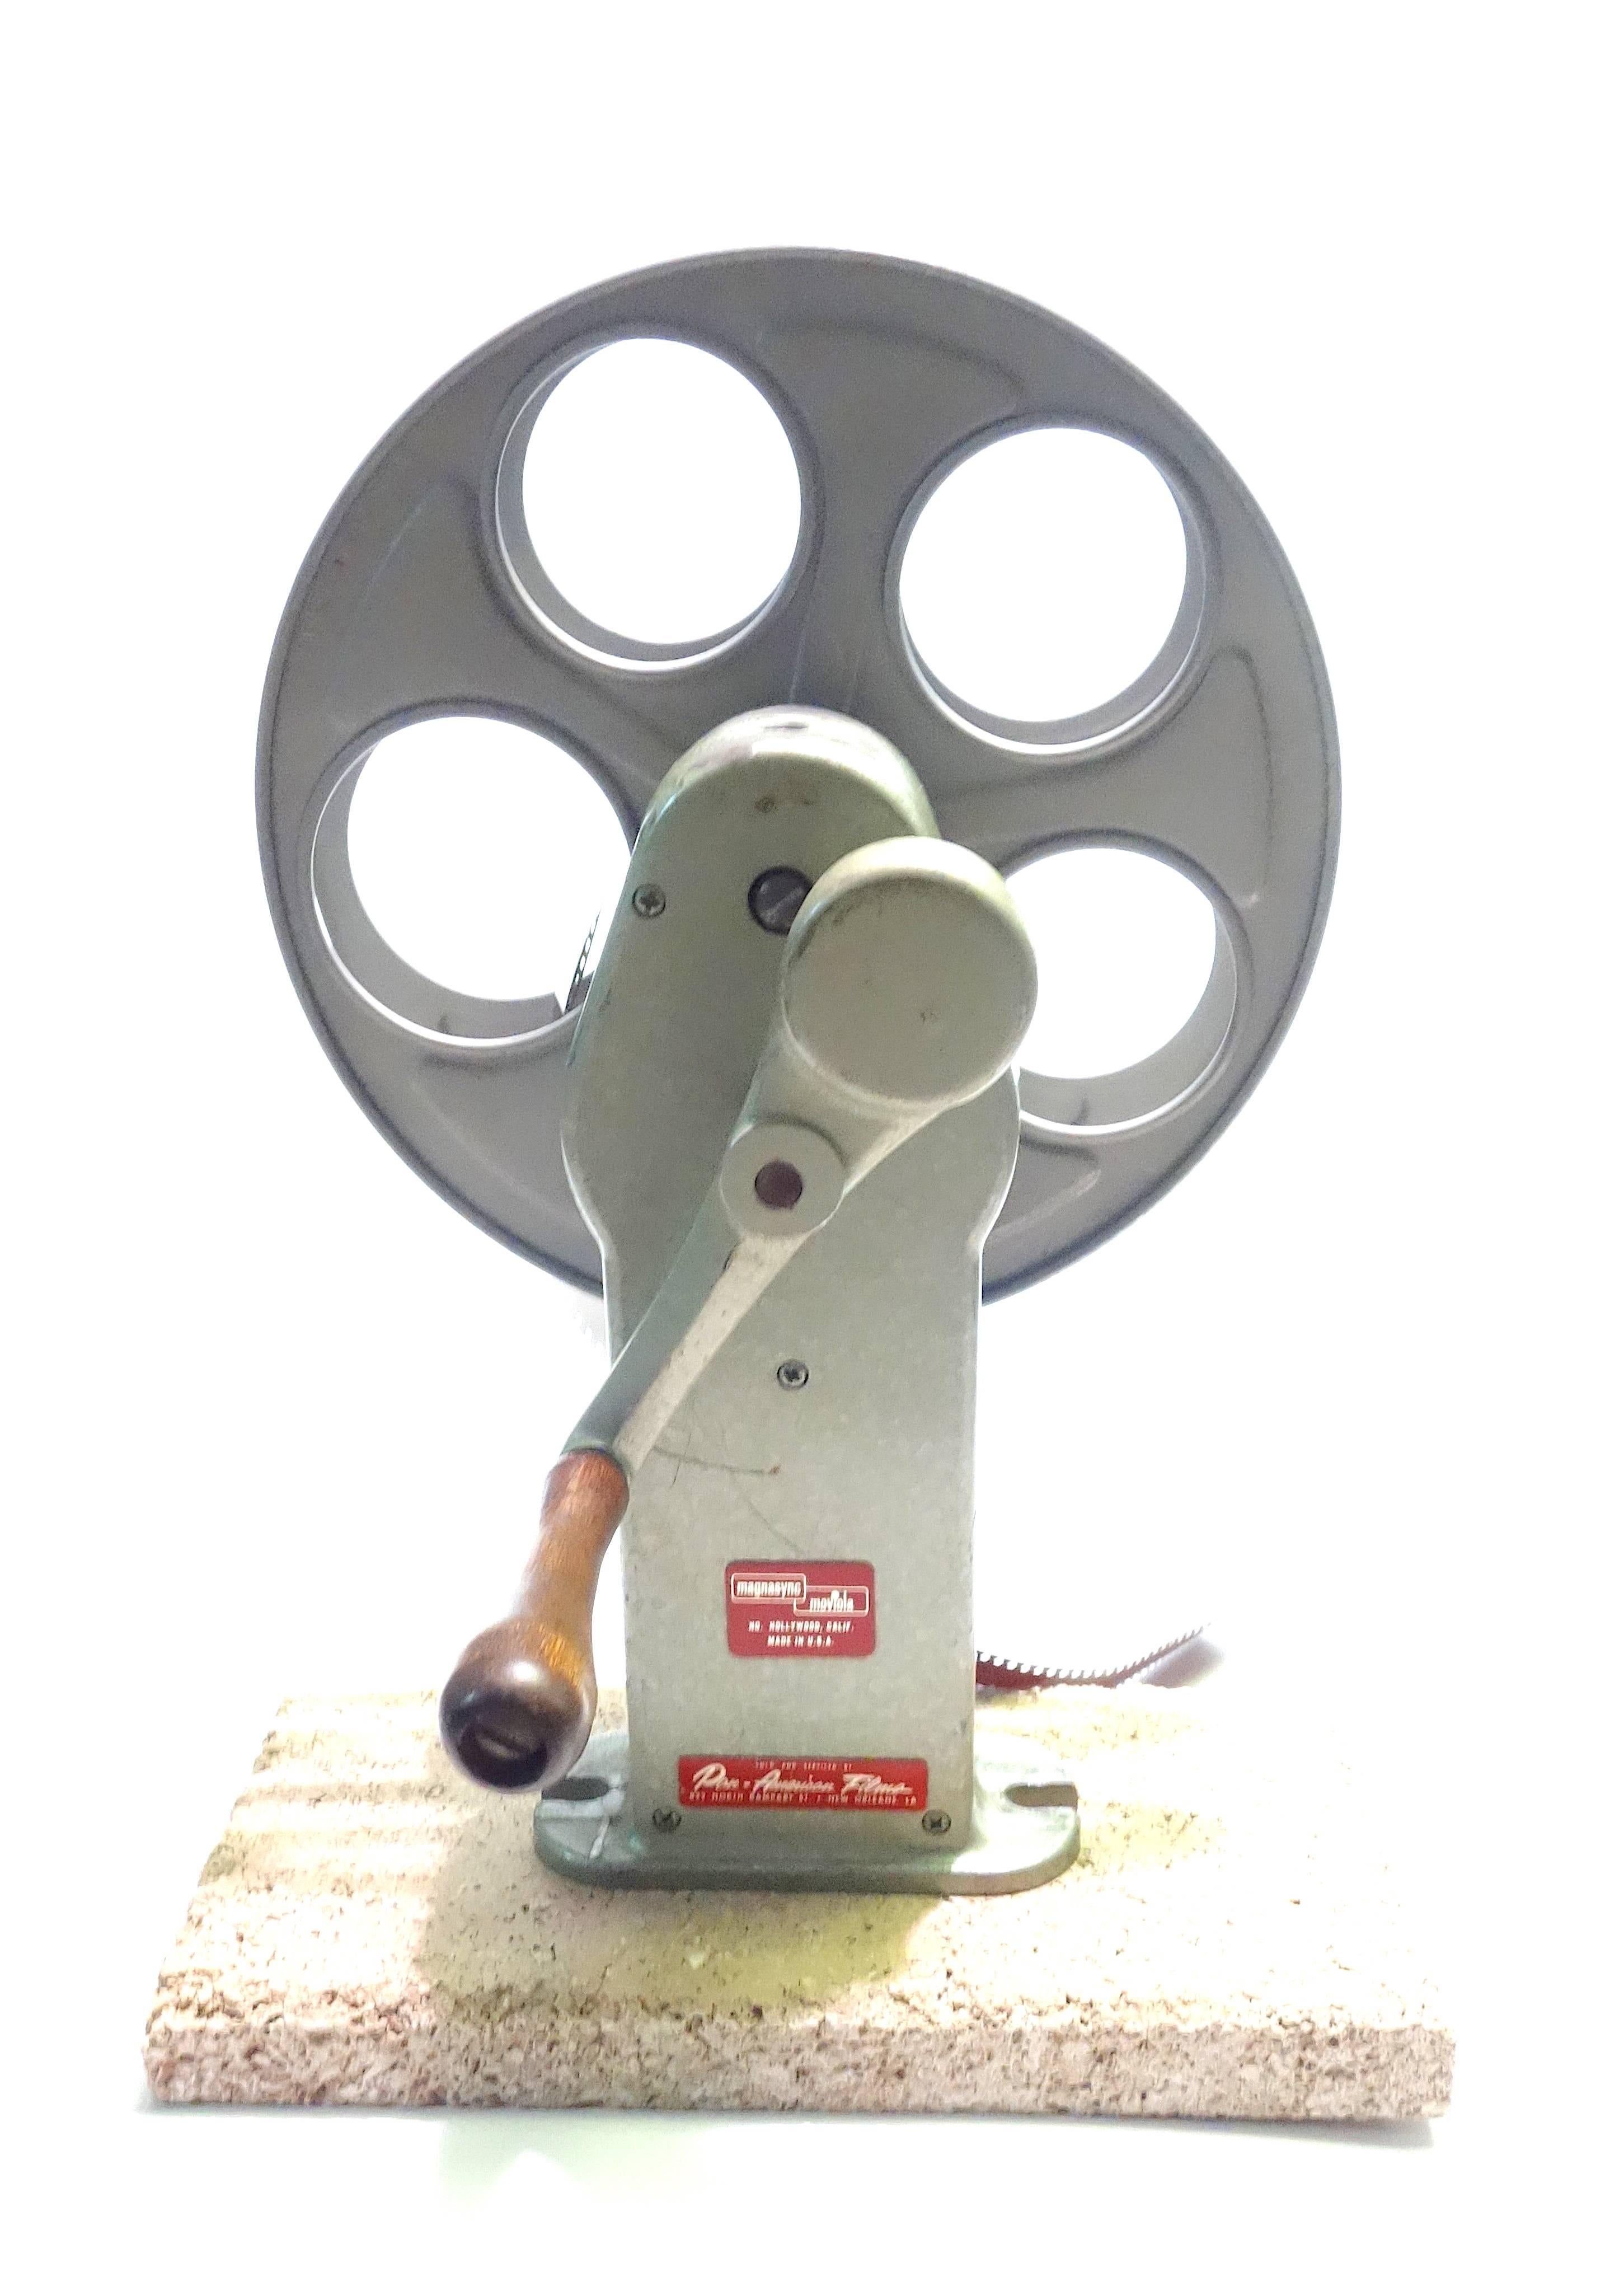 Submitted for your appreciation is this Cinema motion picture 35mm editing rewinder. Complete with 35mm take up reel. A true Hollywood mid 20th century artifact.

NOTE: Our selling prices are usually pre discounted and intended to be at 'Designer